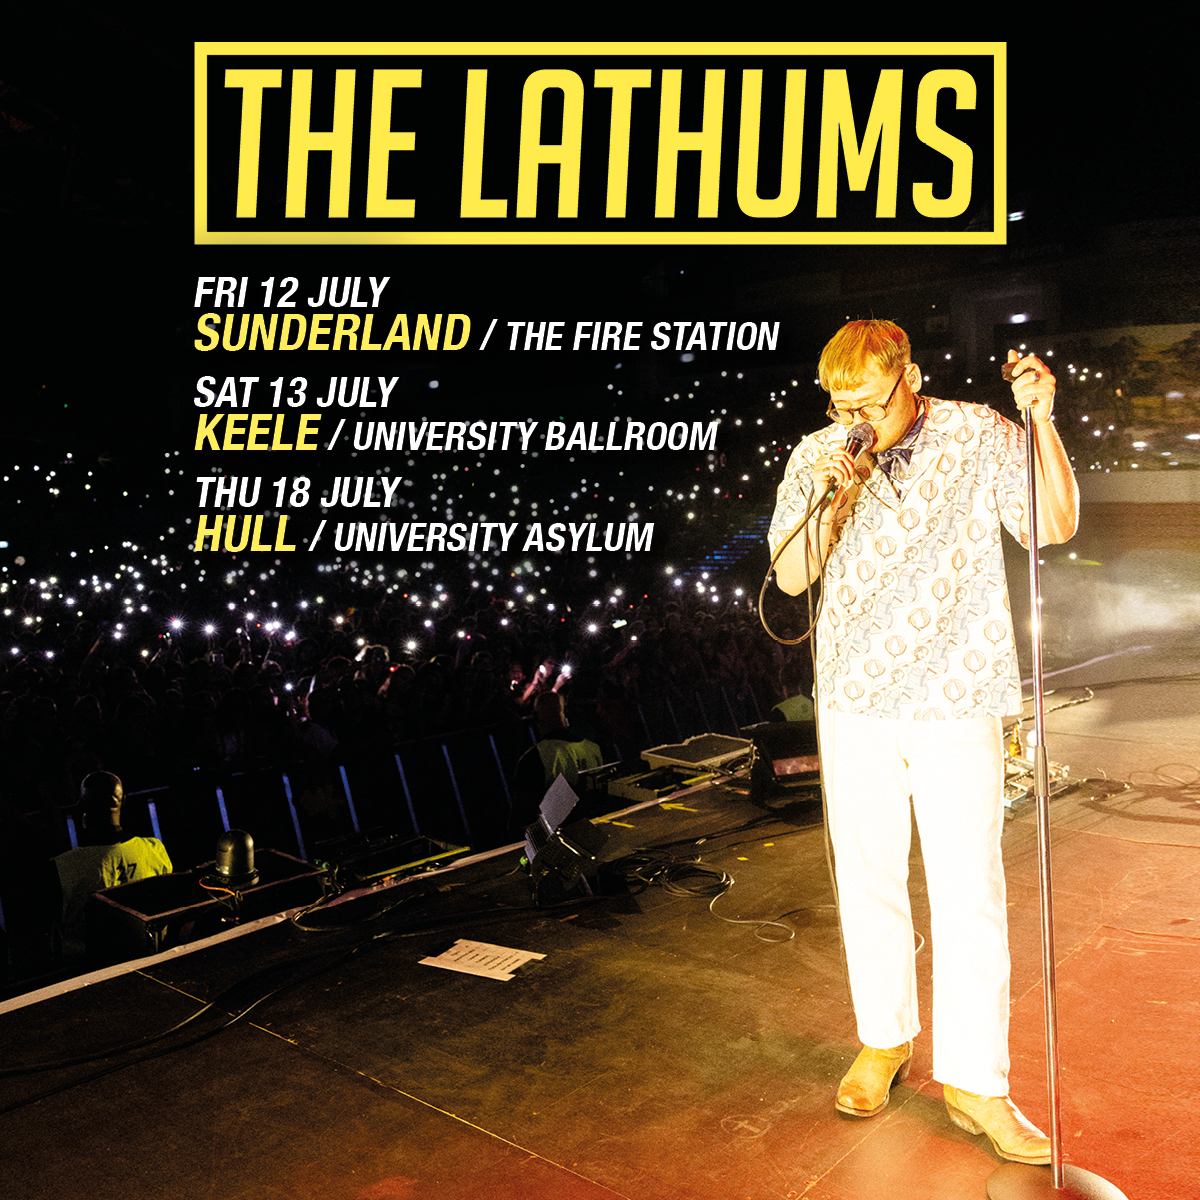 Don't miss this! @TheLathums have just announced 3 warm up shows in Sunderland, Keele and Hull this July ahead of their huge gig at Robin Park, Wigan this summer!🙌 Grab tickets this Friday at 10am: bit.ly/4atBE9R